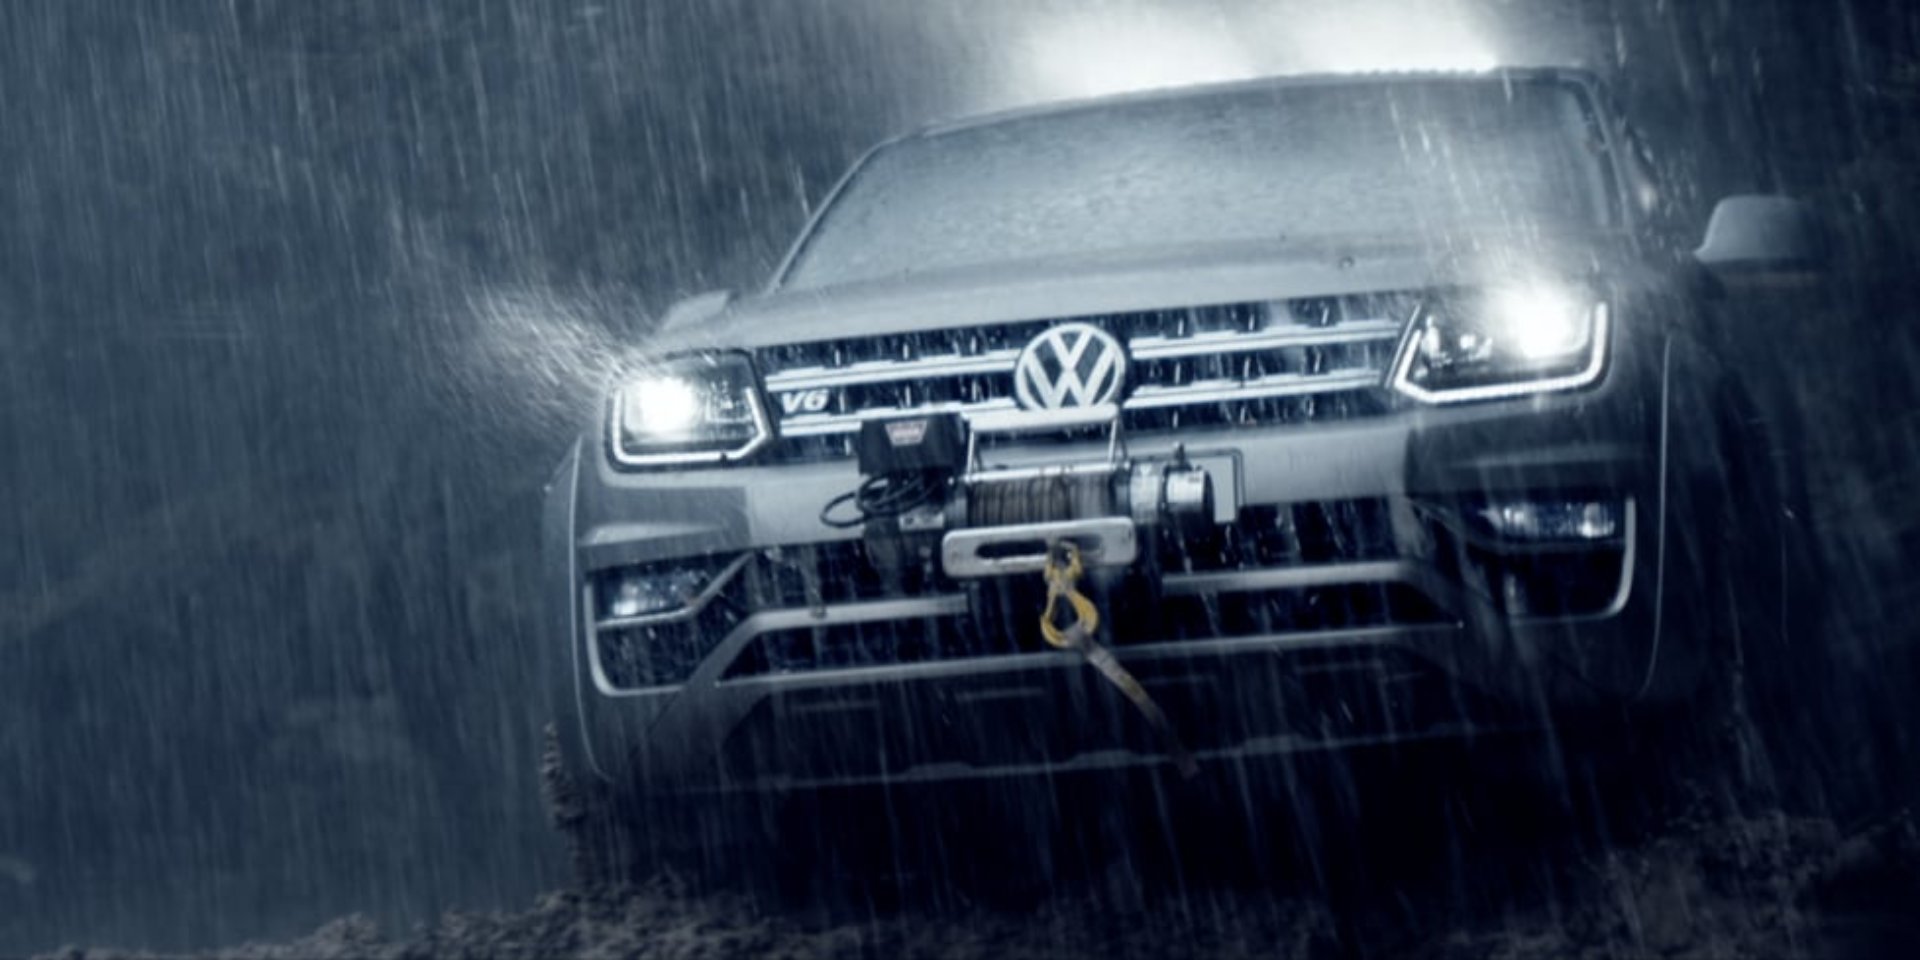 Image 1 Volkswagen - Tough is not Enough